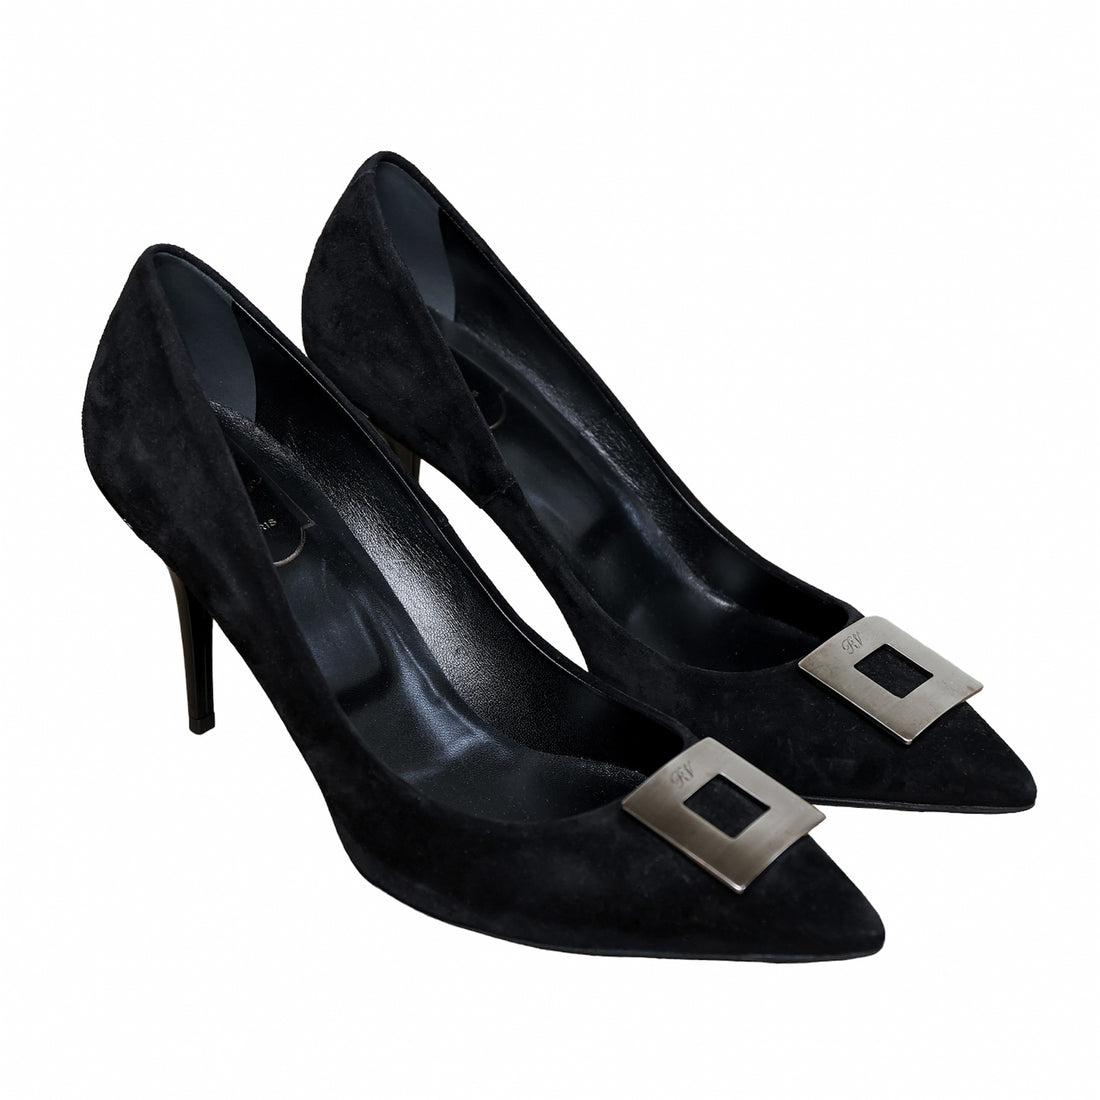 Roger Vivier classic pumps with logo buckle - 100